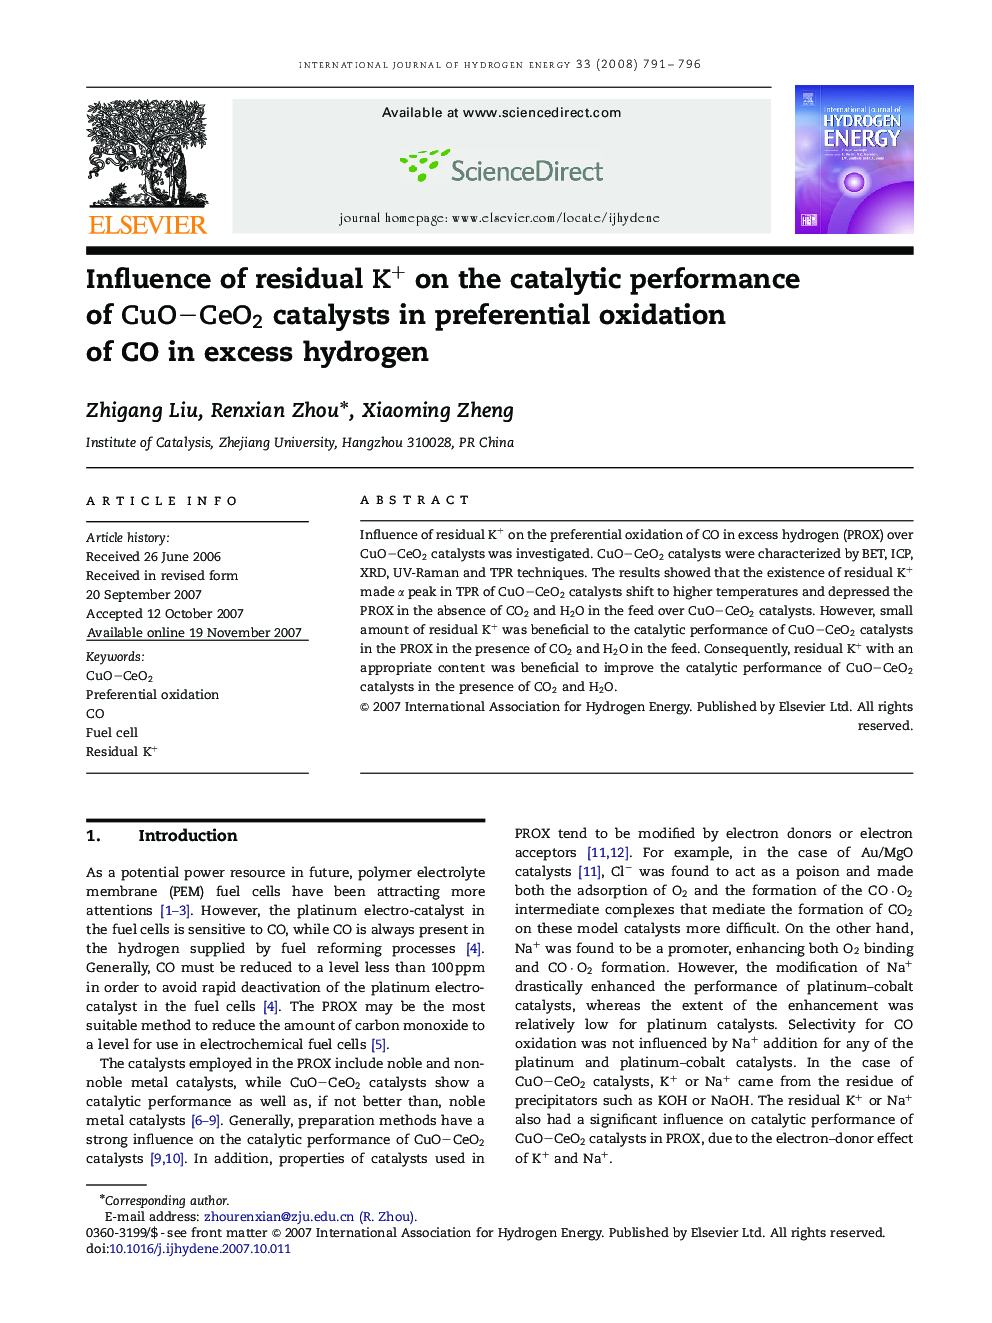 Influence of residual K+K+ on the catalytic performance of CuO–CeO2CuO–CeO2 catalysts in preferential oxidation of CO in excess hydrogen